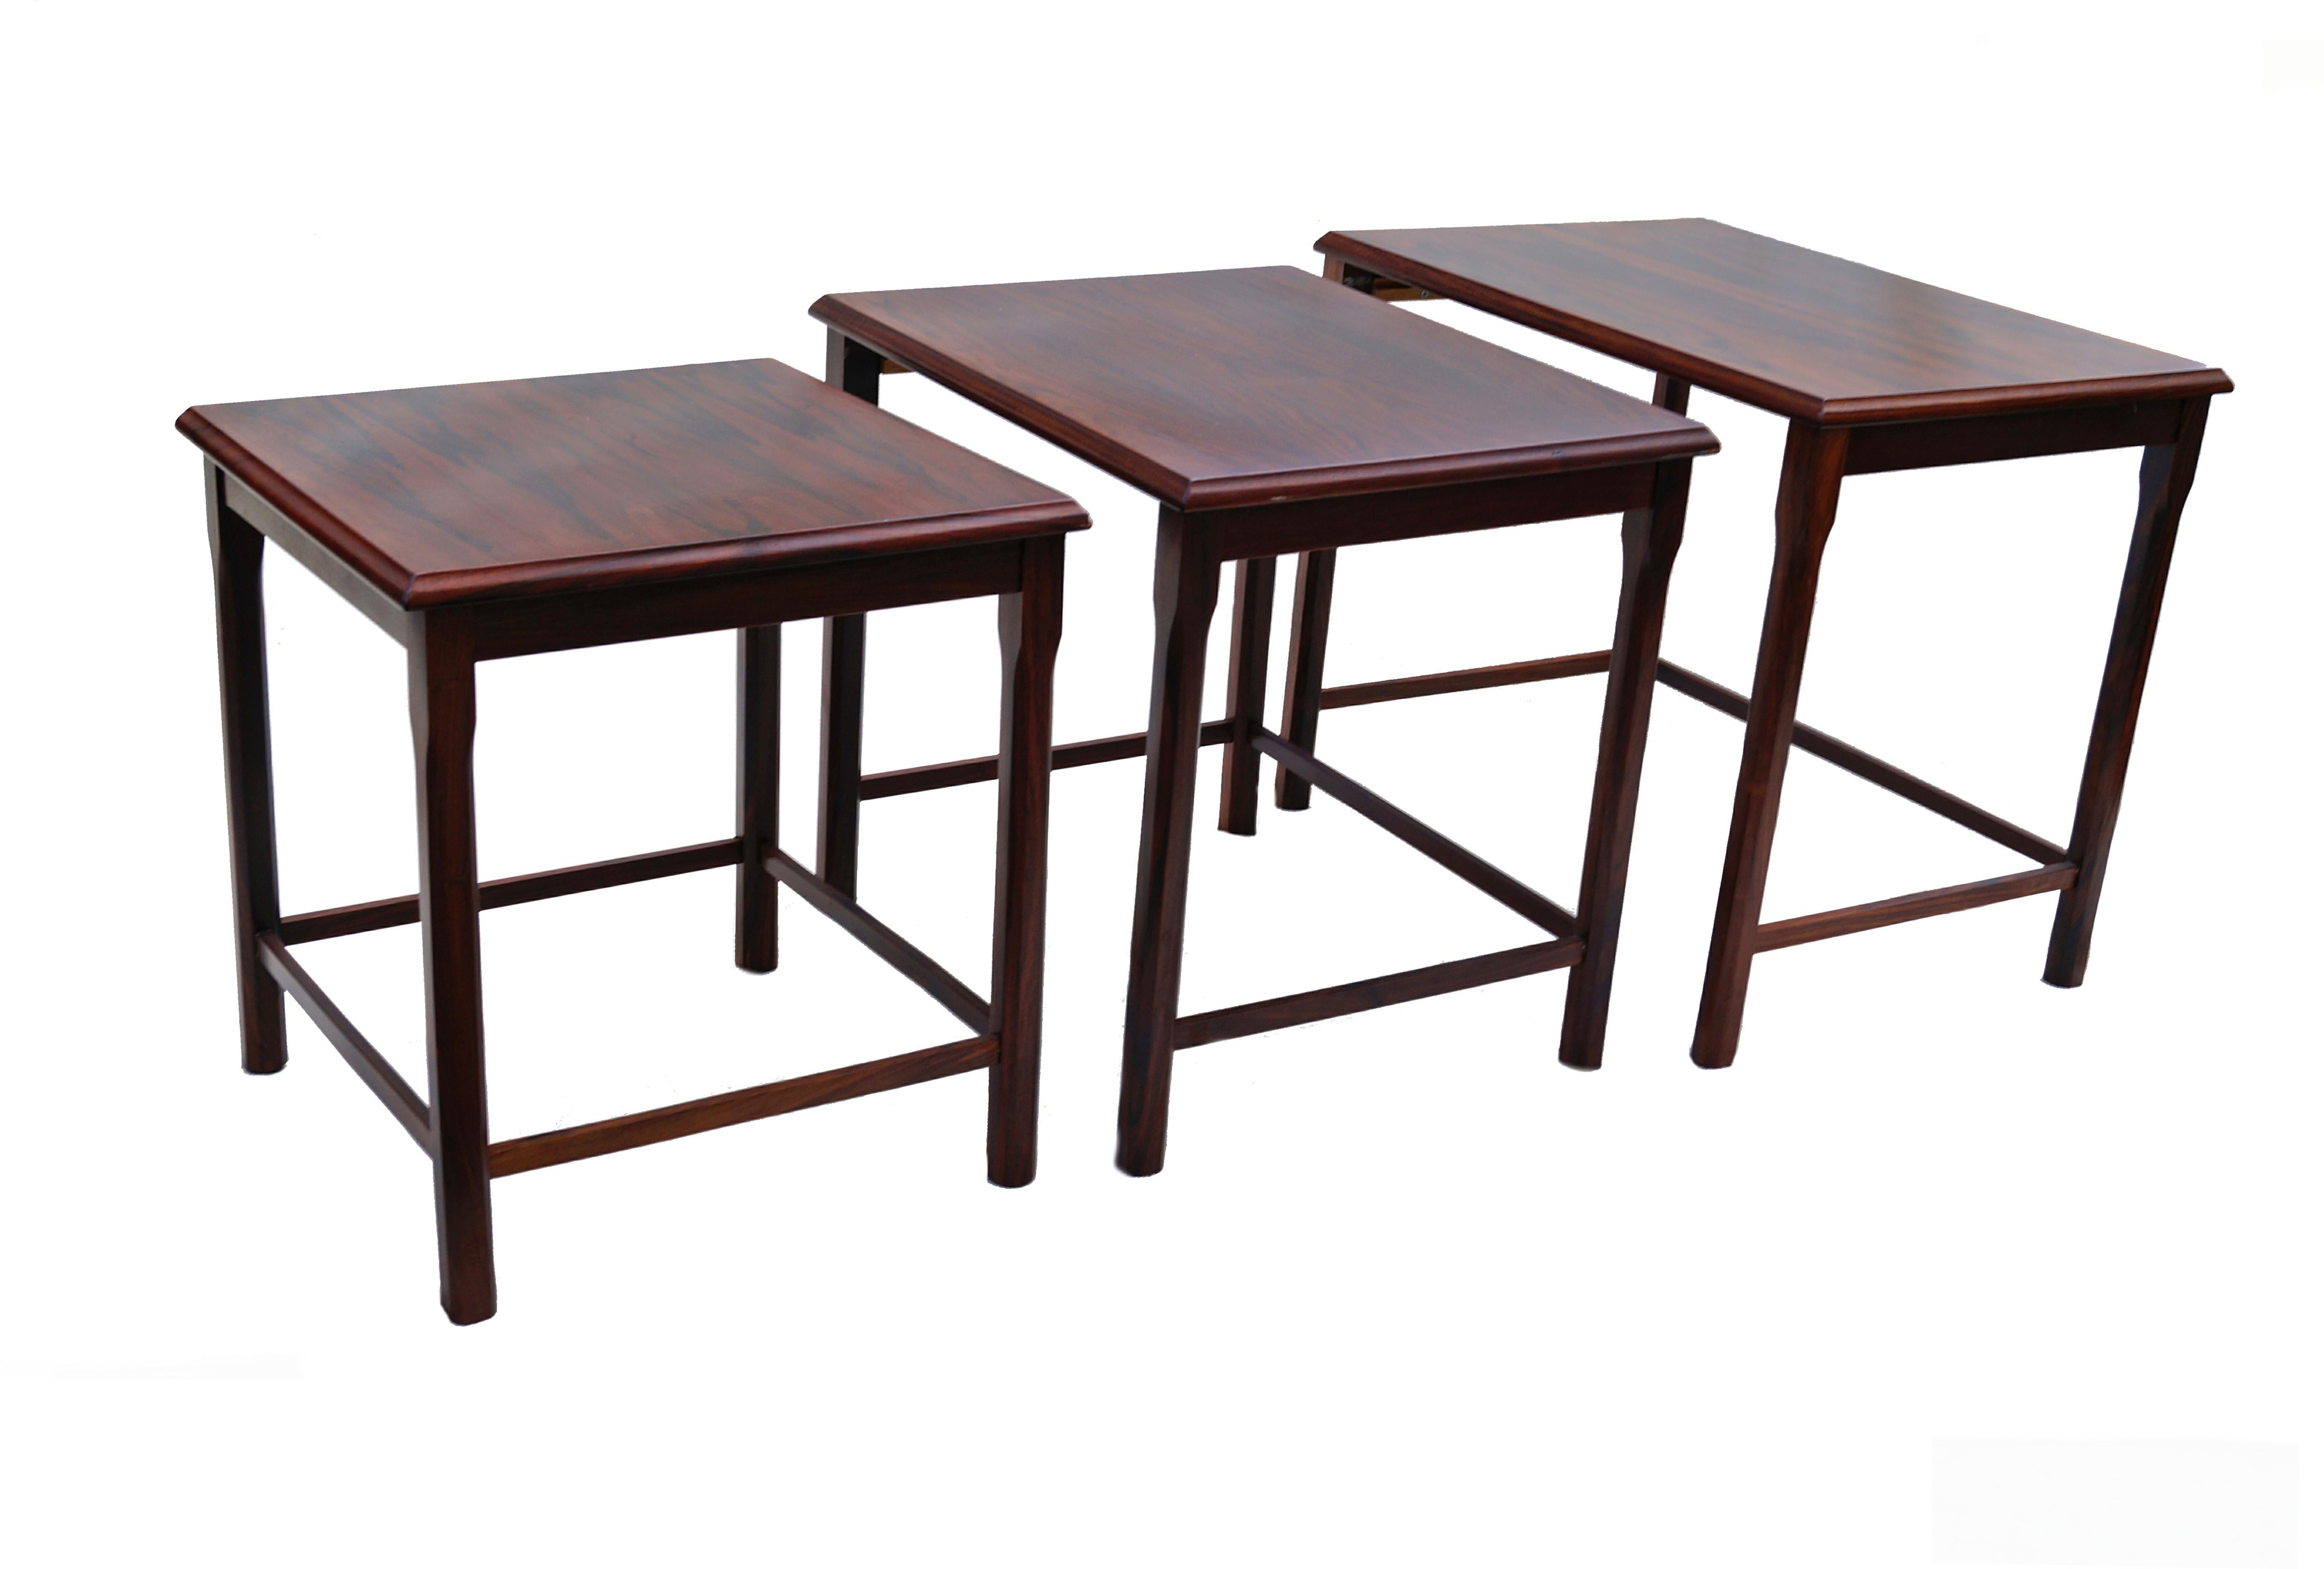 Danish rosewood nesting stackable tables by EW Bach for Mobelfabriken Toften.
The largest measures: 18 3/4